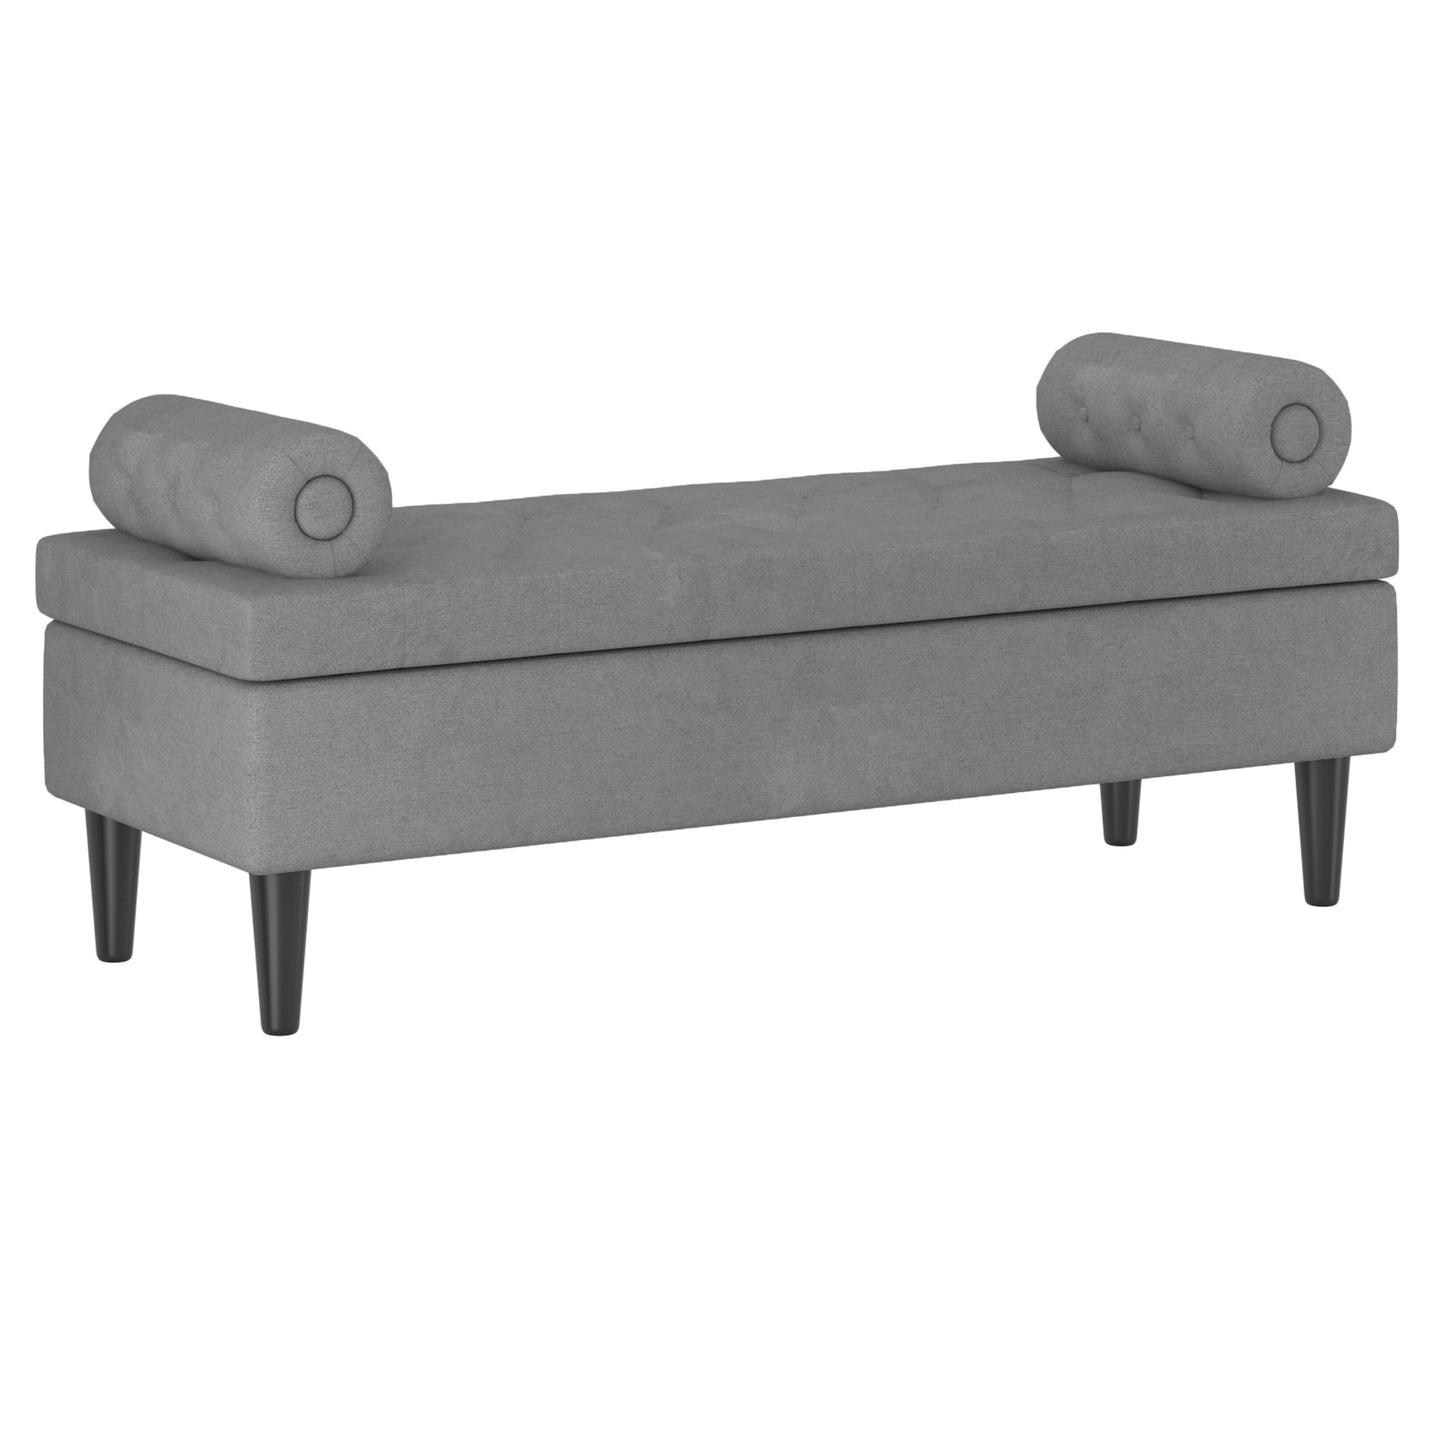 Adith Storage Ottoman in Grey and Black